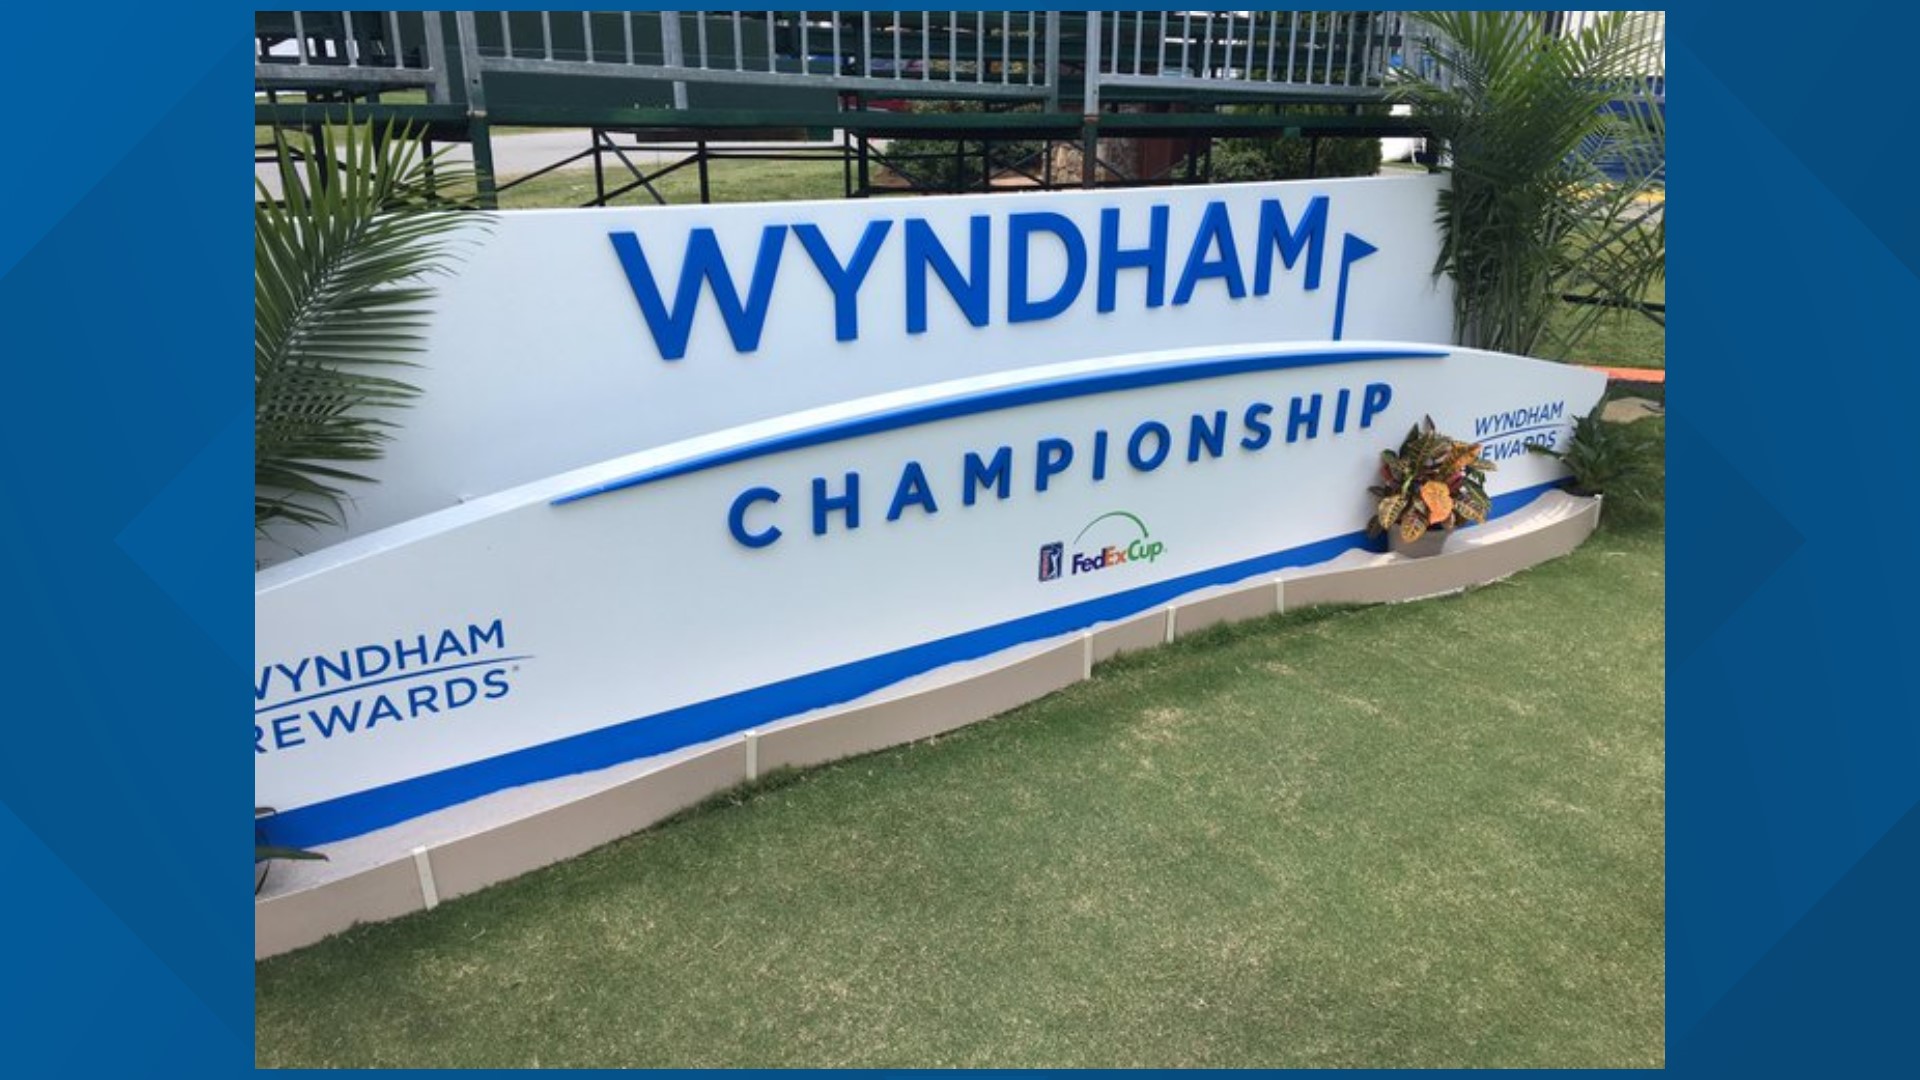 Round one of the 2019 Wyndham Championship is Thursday at Sedgefield Country Club